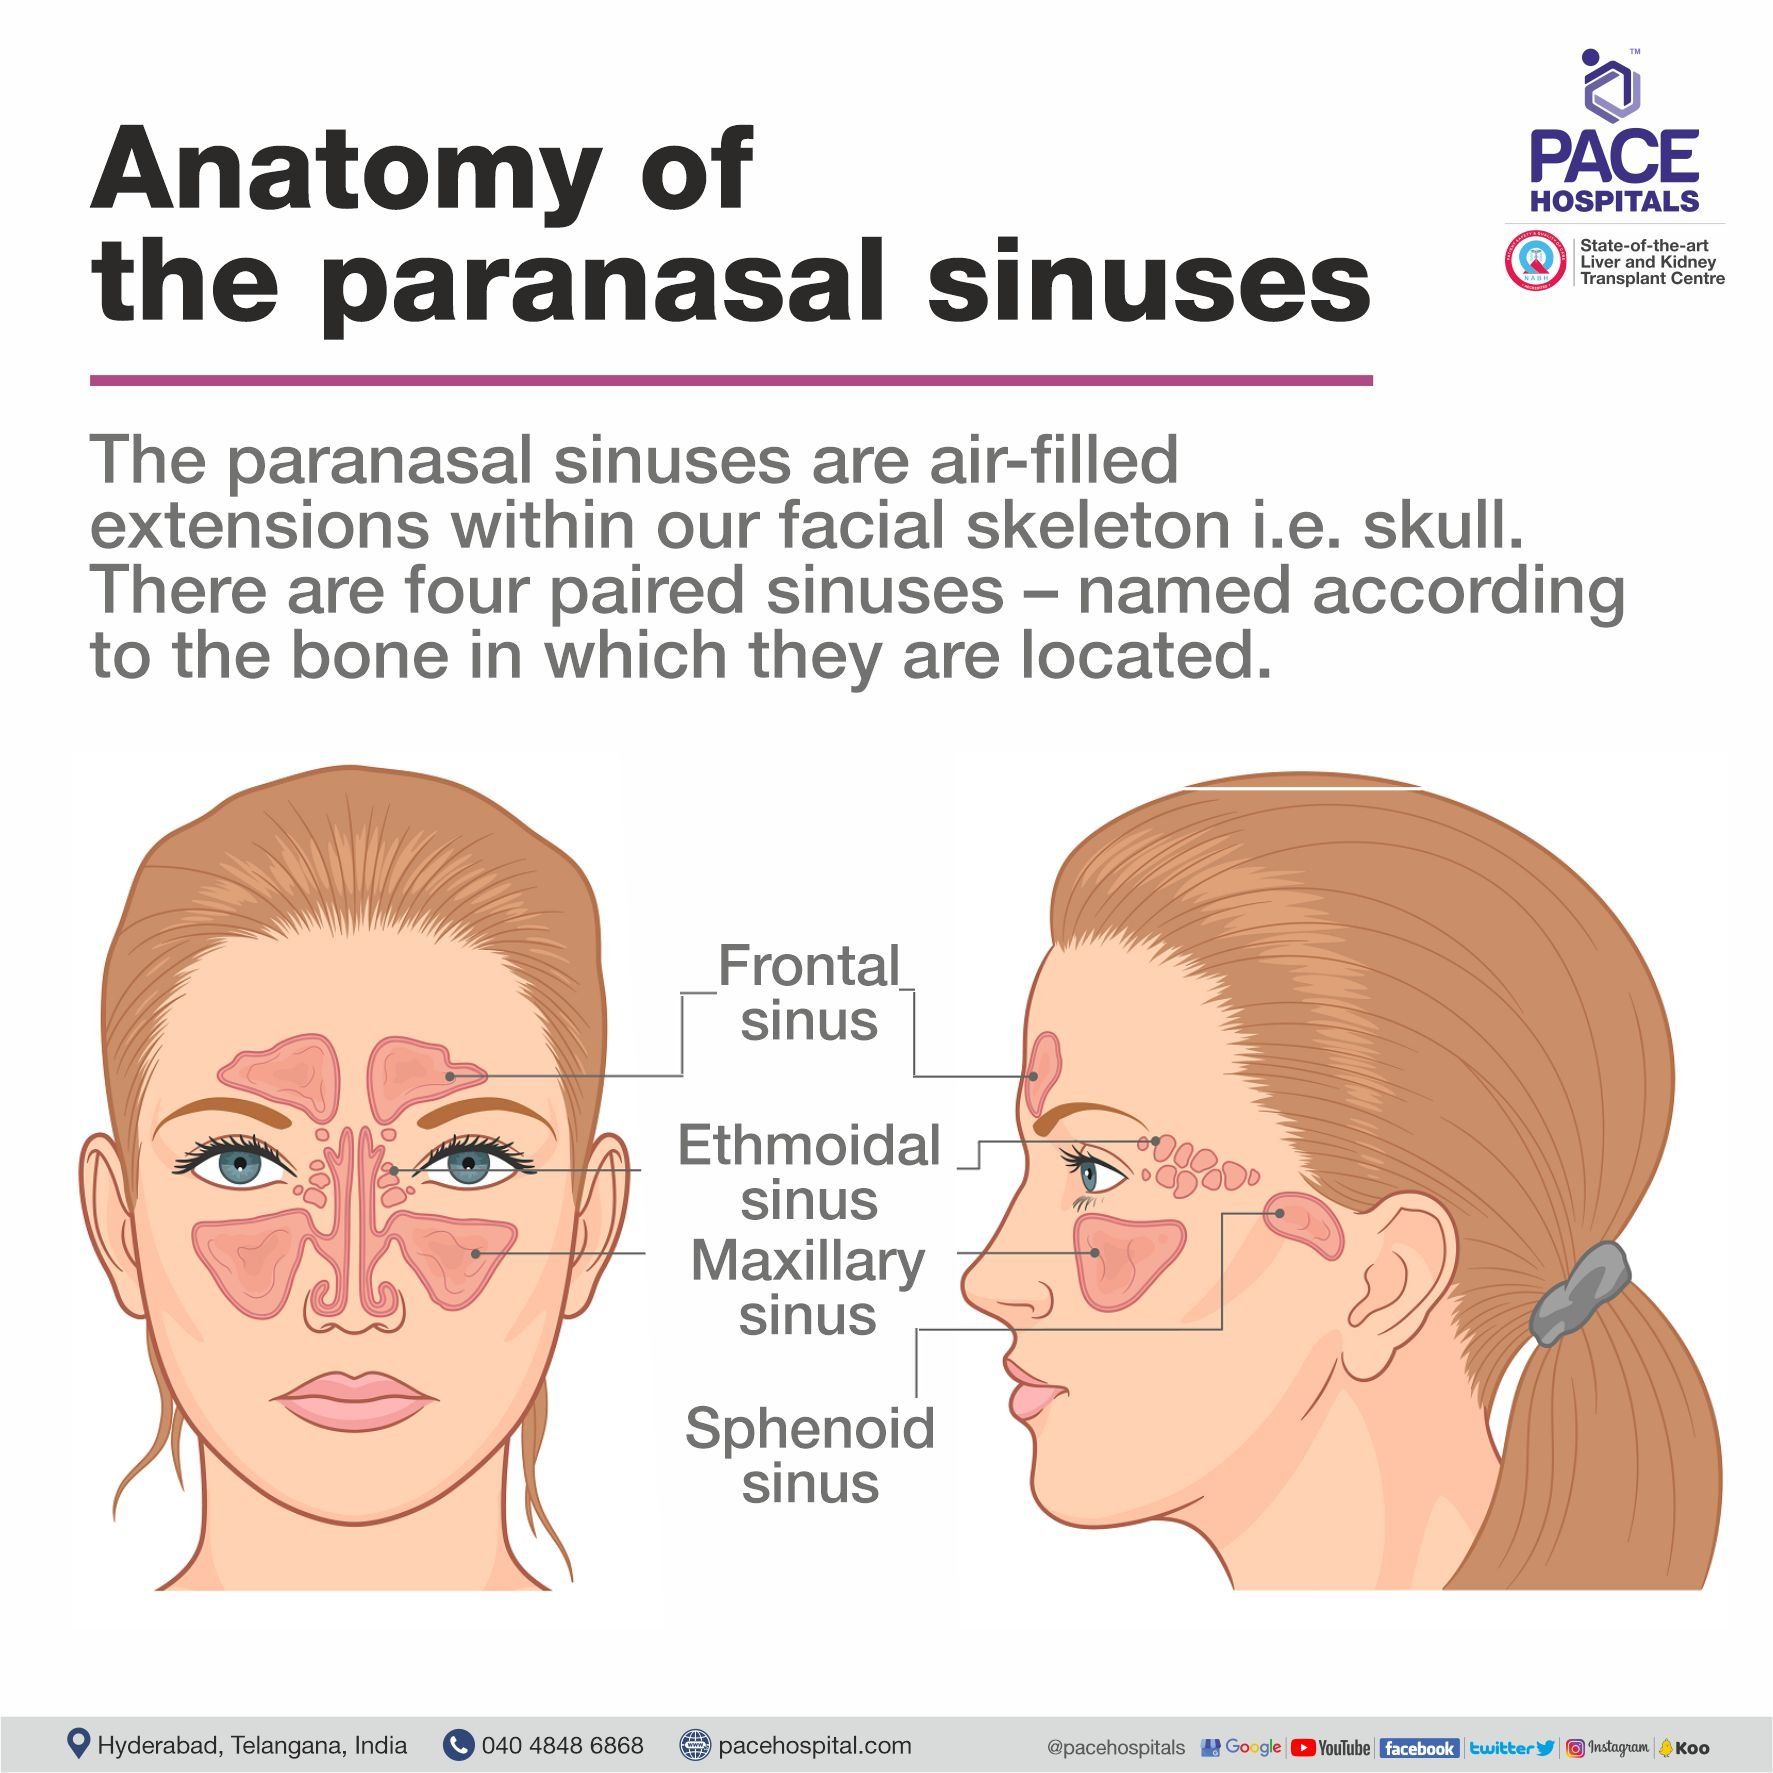 anatomy of the paranasal sinuses - function of the paranasal sinuses